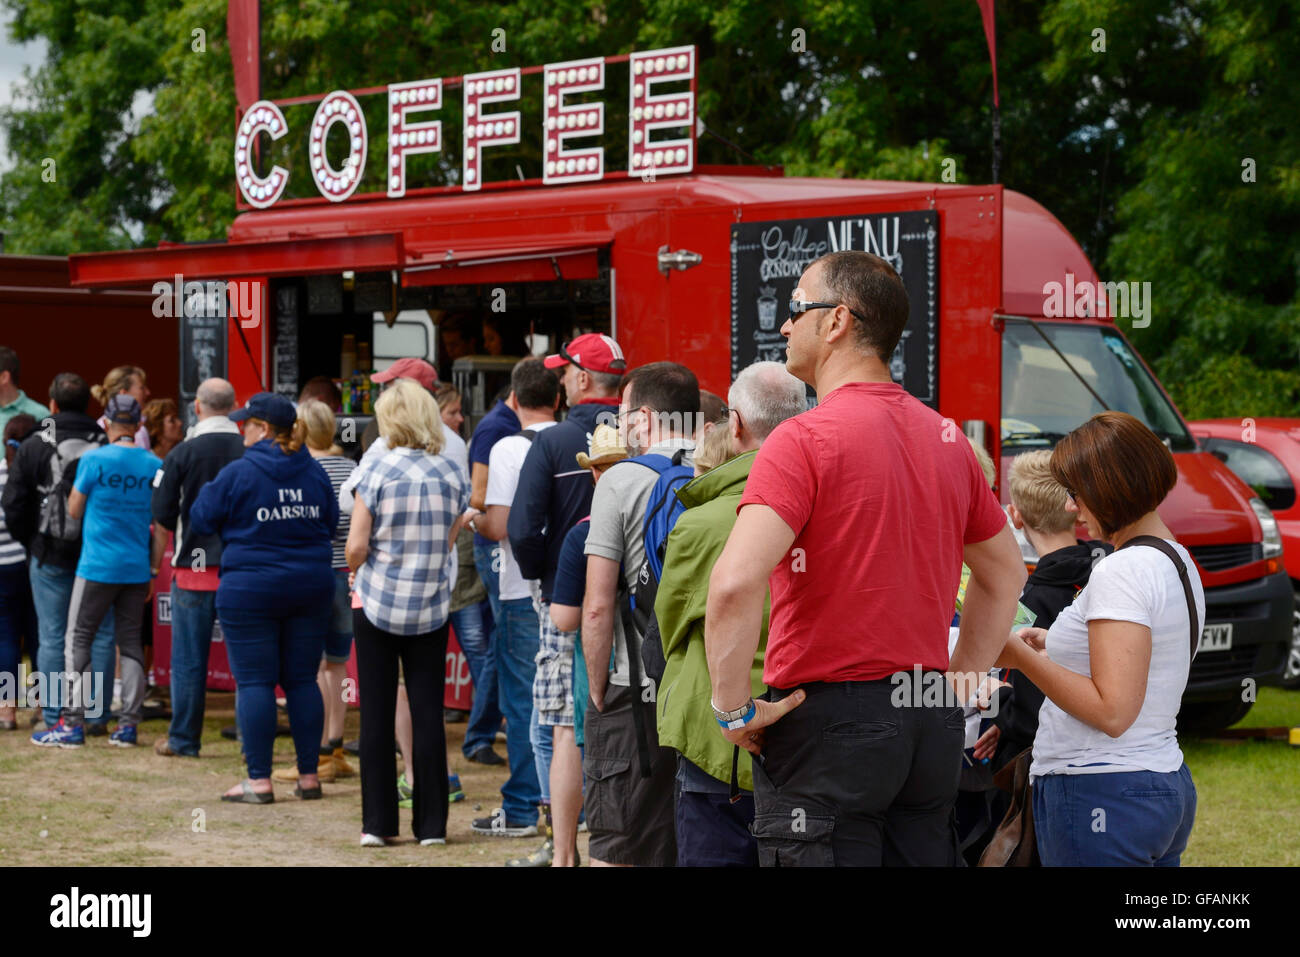 Carfest North, Bolesworth, Cheshire, UK. 30th July, 2016. People queuing for coffee. The event is the brainchild of Chris Evans and features 3 days of cars, music and entertainment with profits being donated to the charity Children in Need. Credit:  Andrew Paterson/Alamy Live News Stock Photo